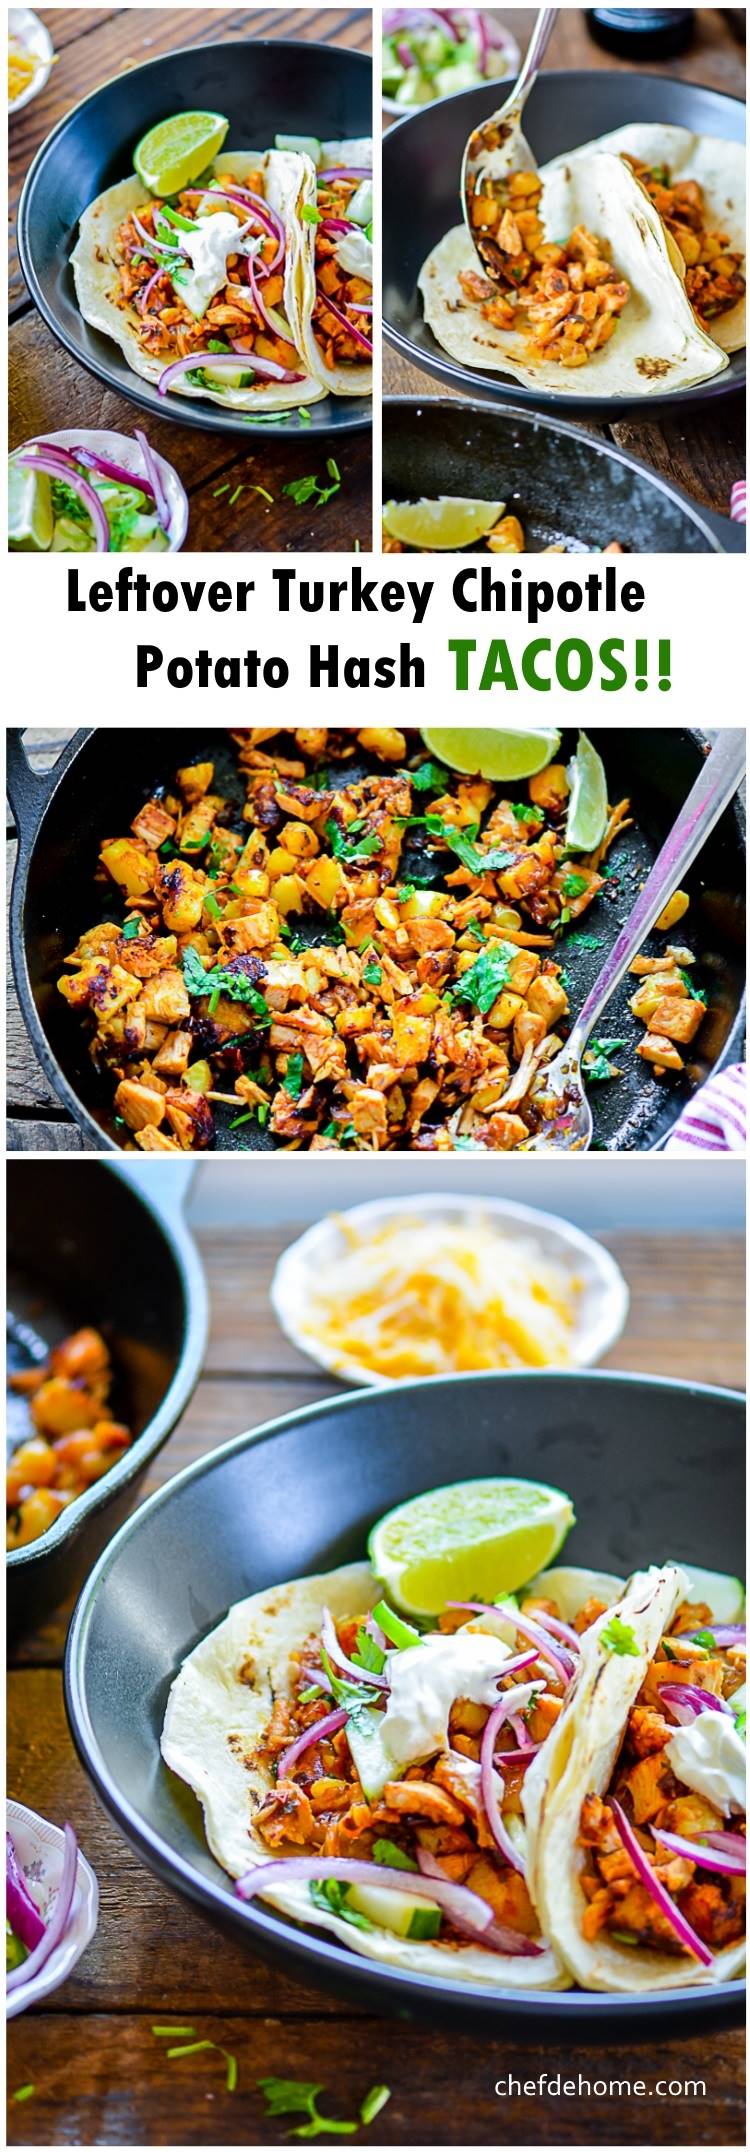 Leftover Turkey and Potato Hash Tacos for Easy and flavorful Weekday Dinner under 20 minutes | chefdehome.com 